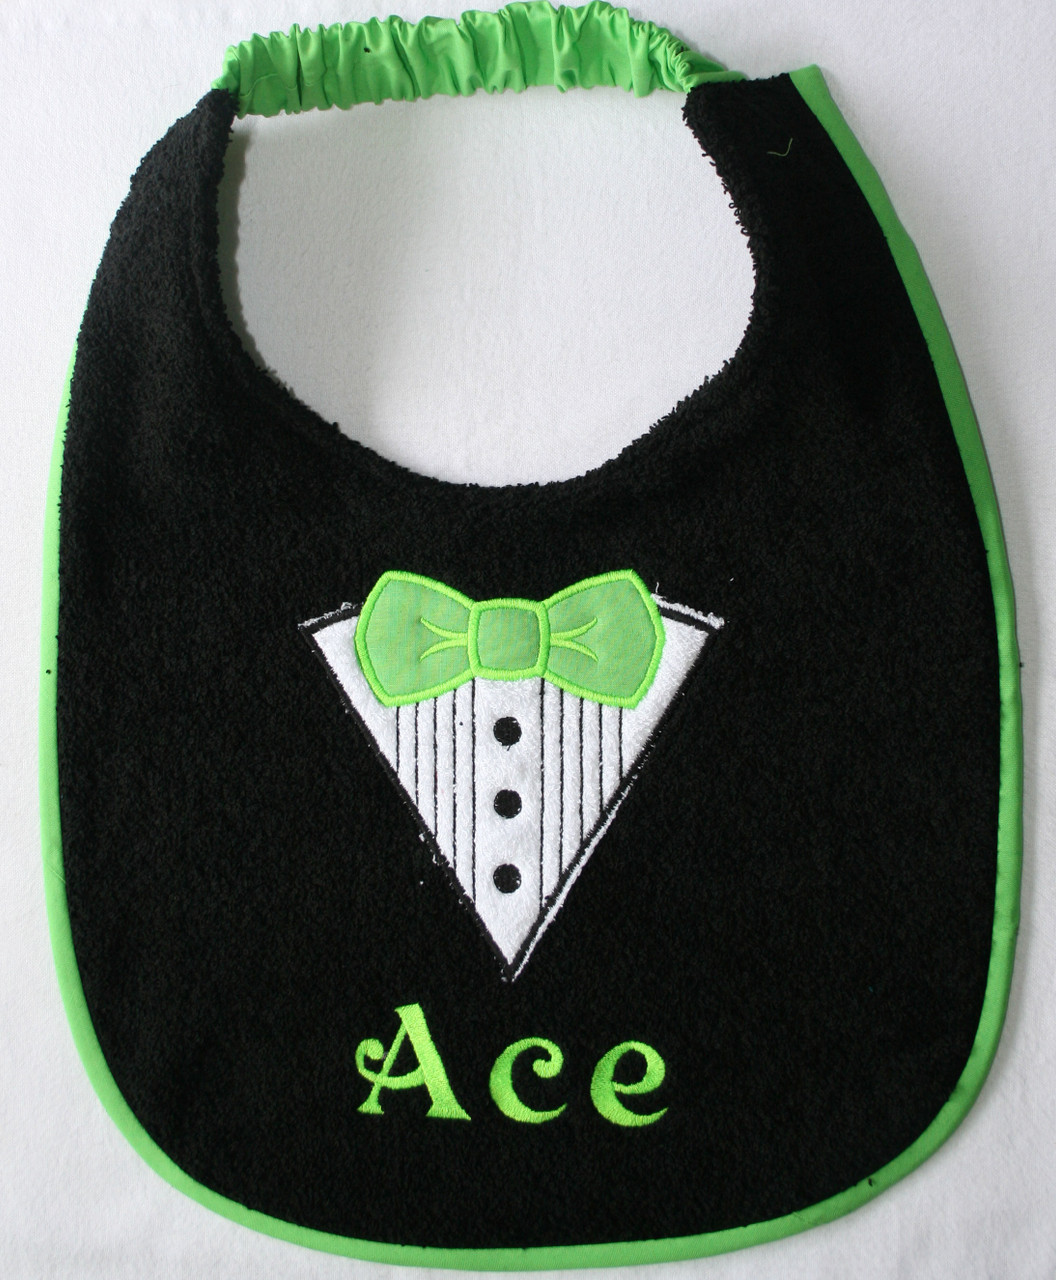 Tuxedo bib in special colors - Designs By 2Paws